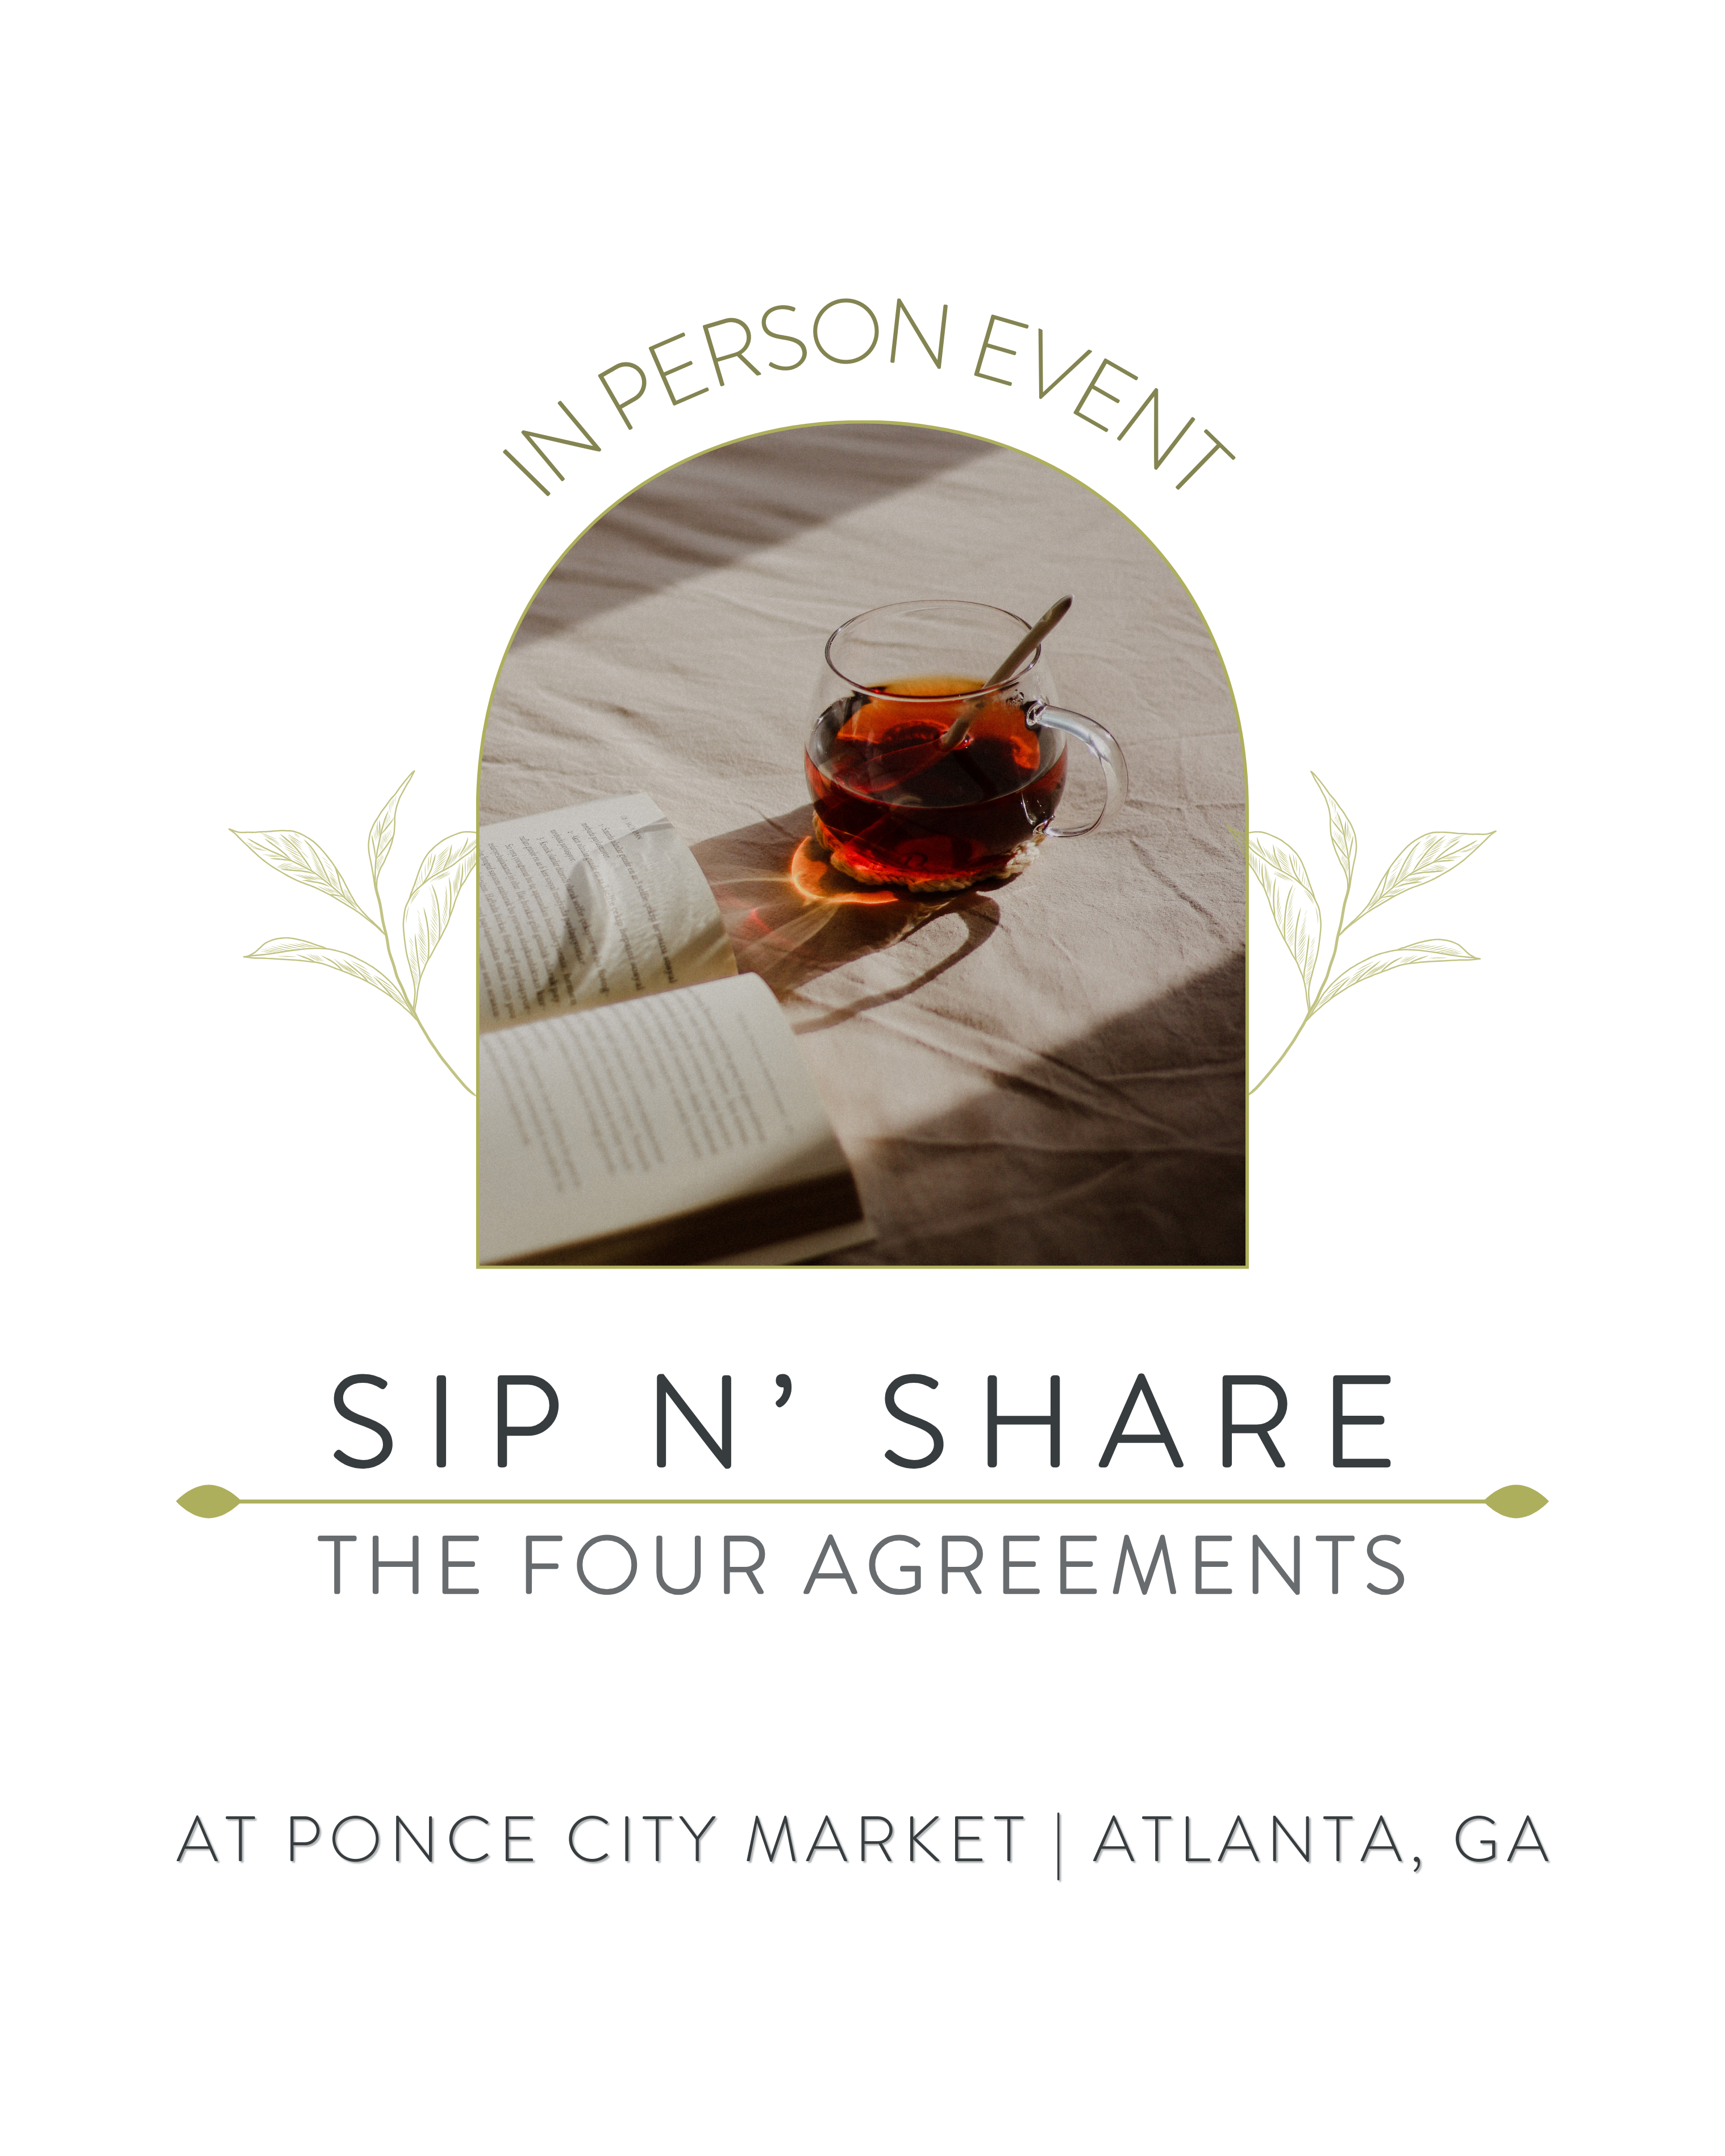 Sip N Share: The Four Agreements